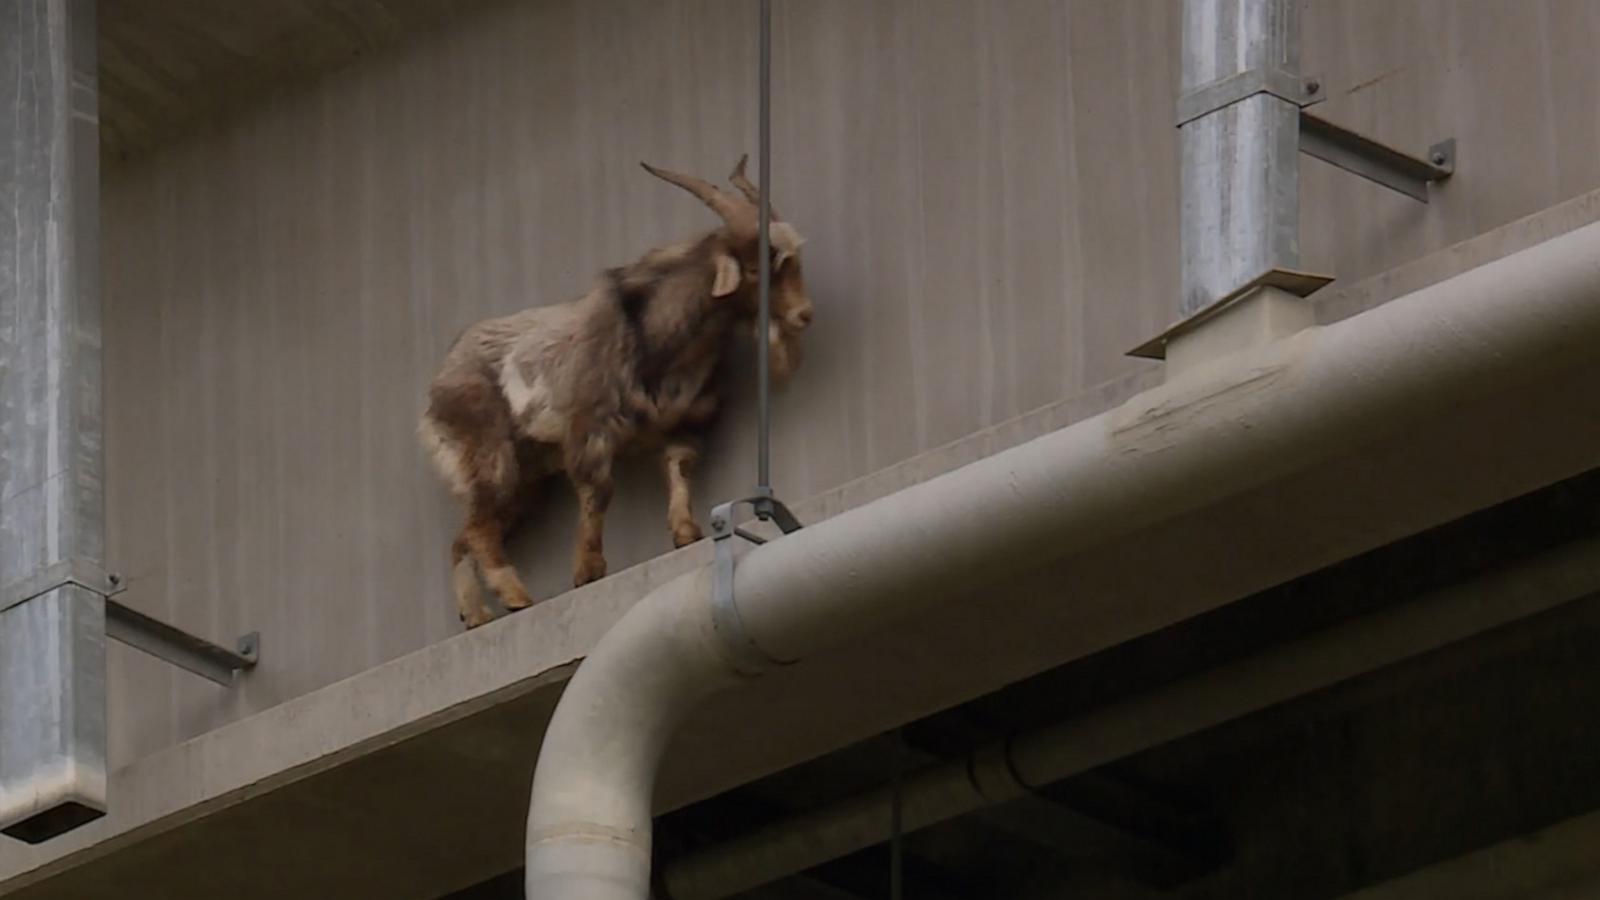 VIDEO: Goat rescued from bridge reunited with owners